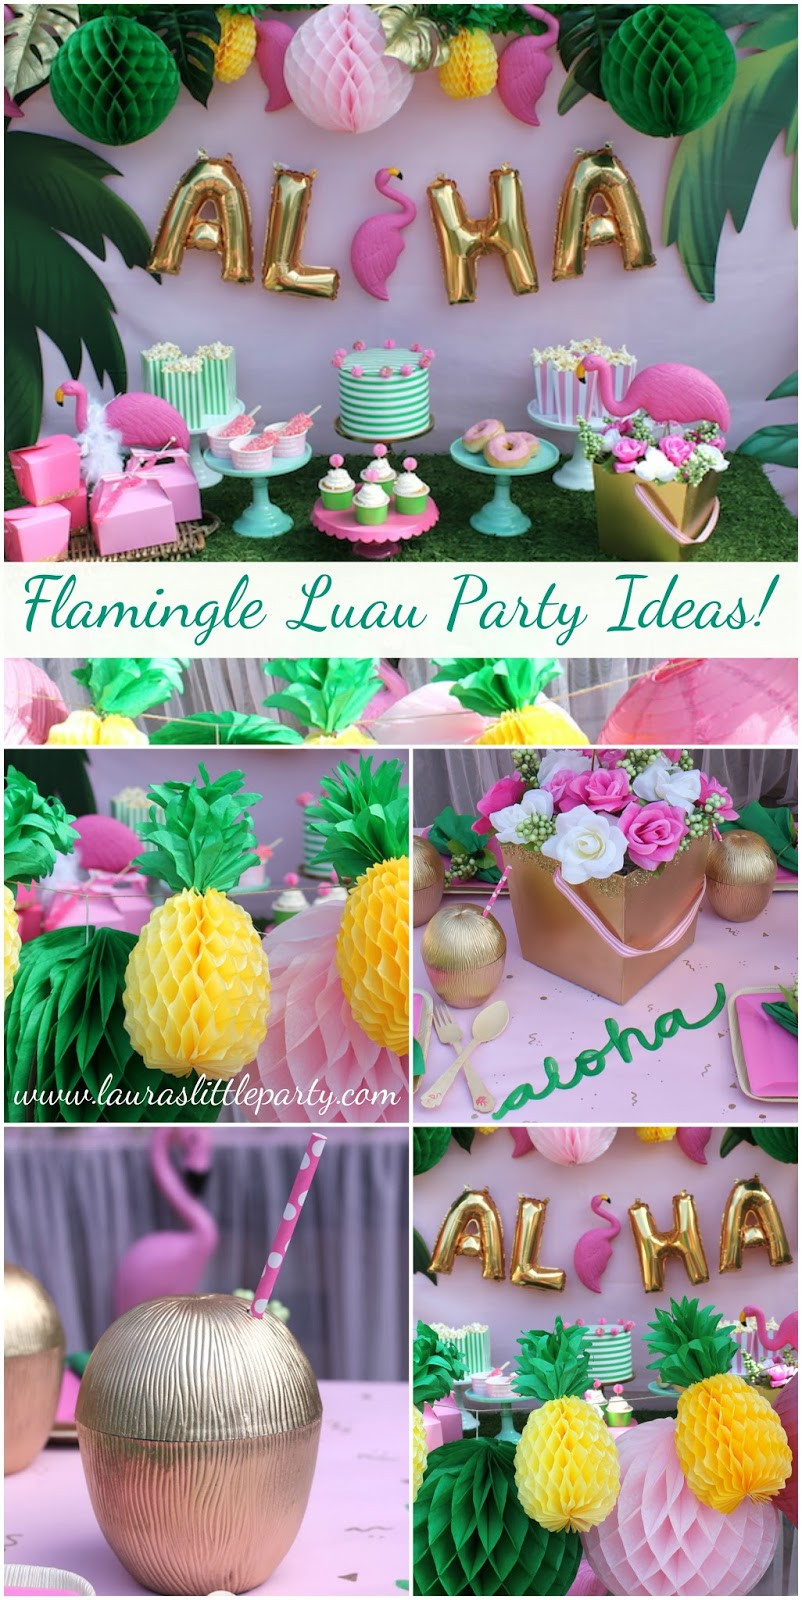 Summer Party Theme Ideas For Adults
 Let s Flamingle Luau Summer Party Ideas LAURA S little